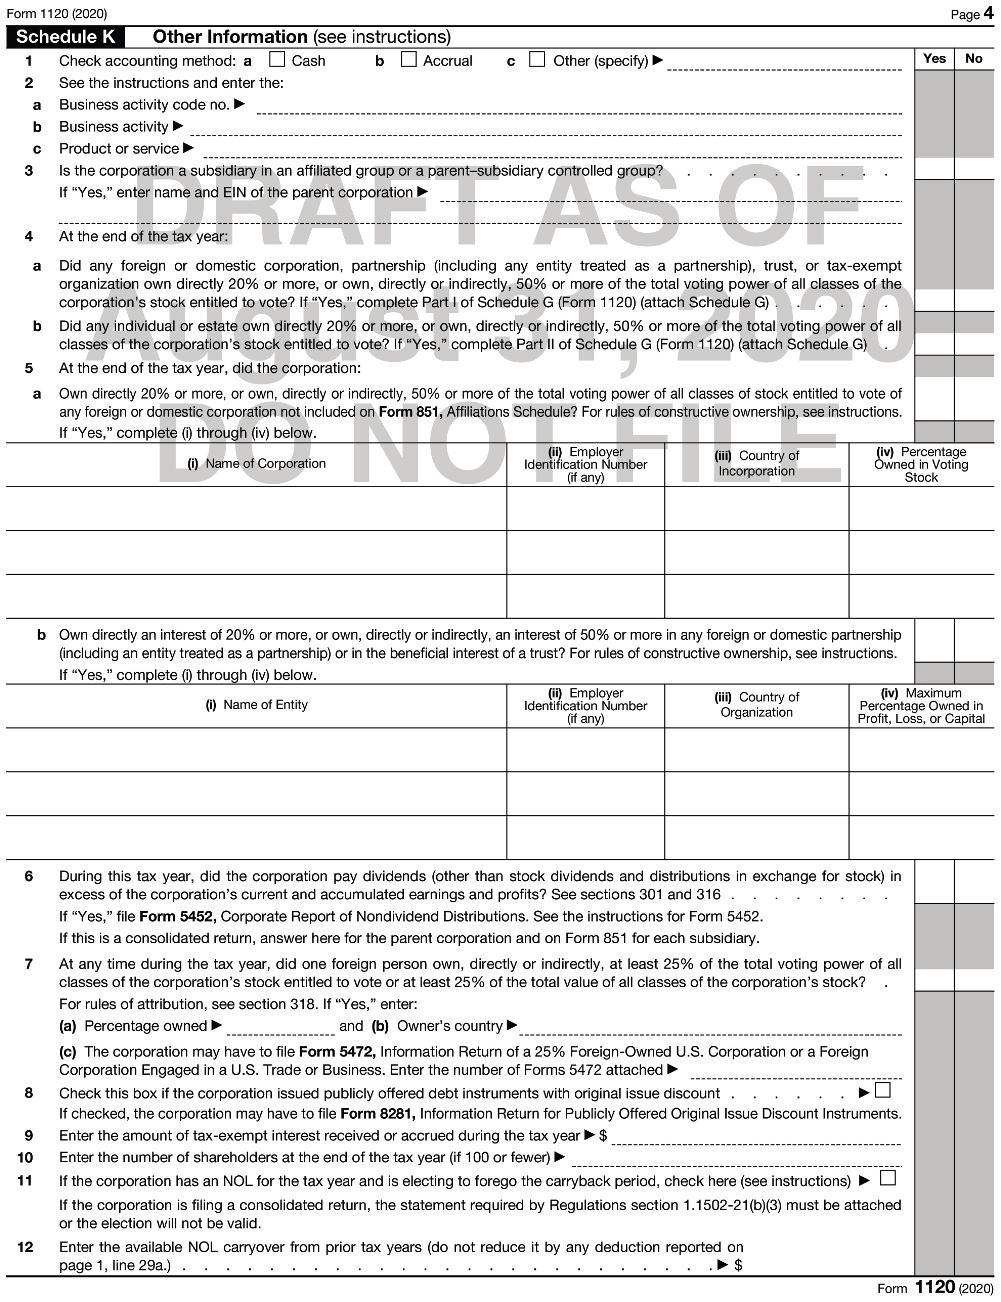 Form 1120 (2020) Schedule K Other Information (see instructions) 1 Check accounting method: a Cash 2 3 4 a